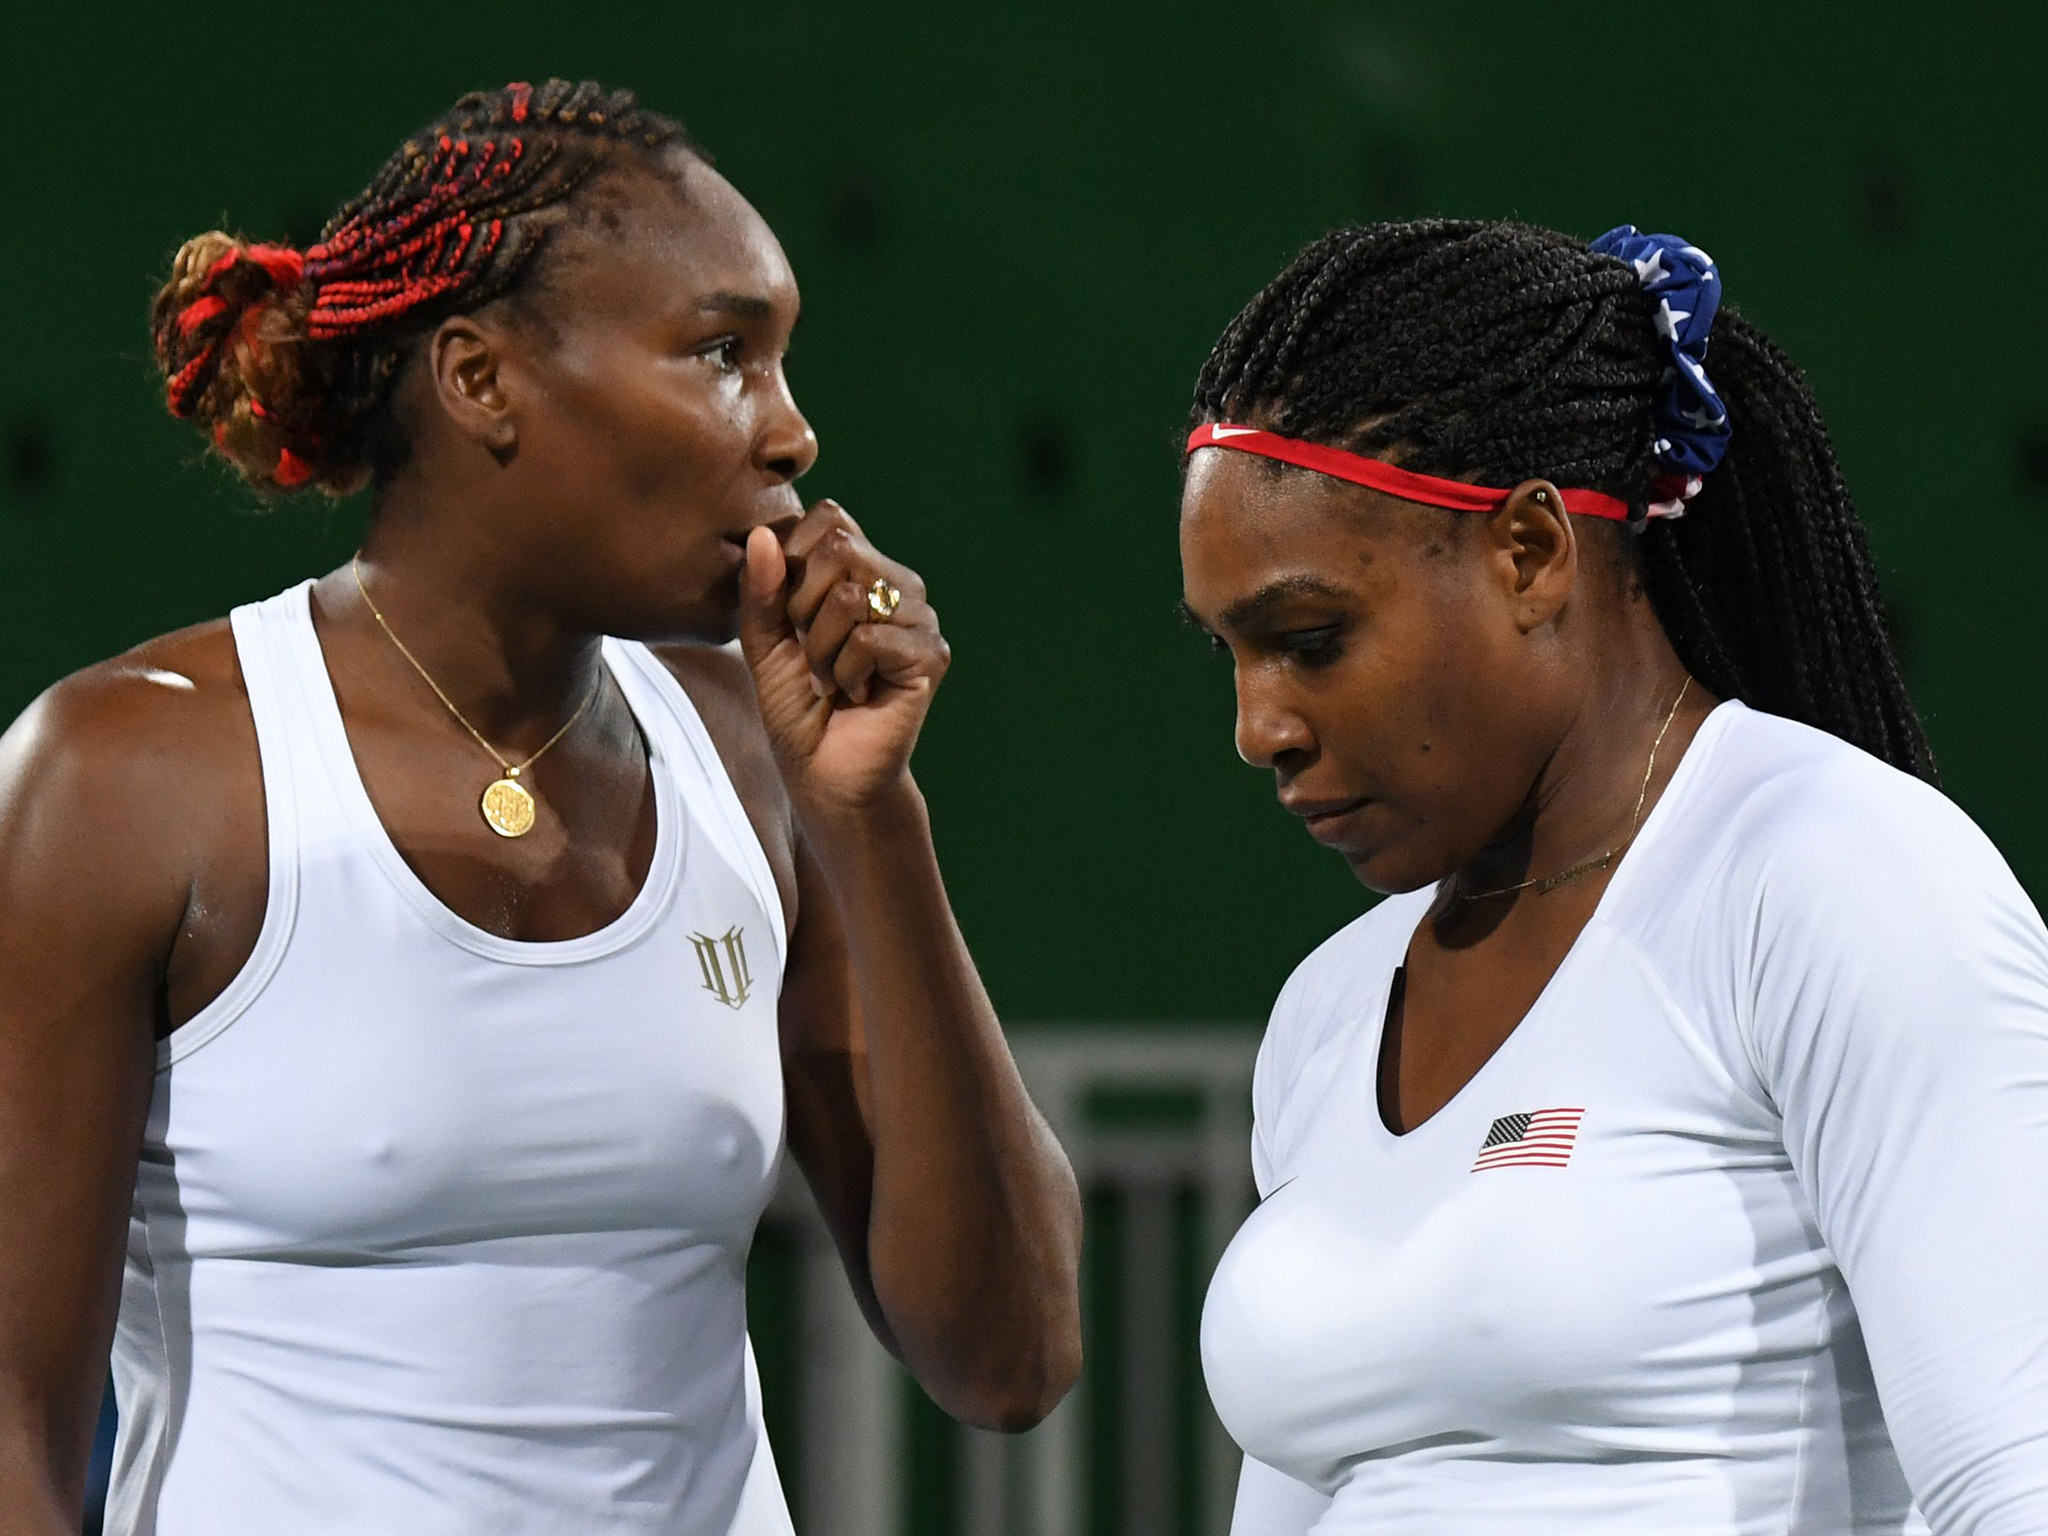 2048x1536 Rio 2016: Serena Williams and sister Venus suffer first ever Olympic defeat  in women's doubles | The Independent